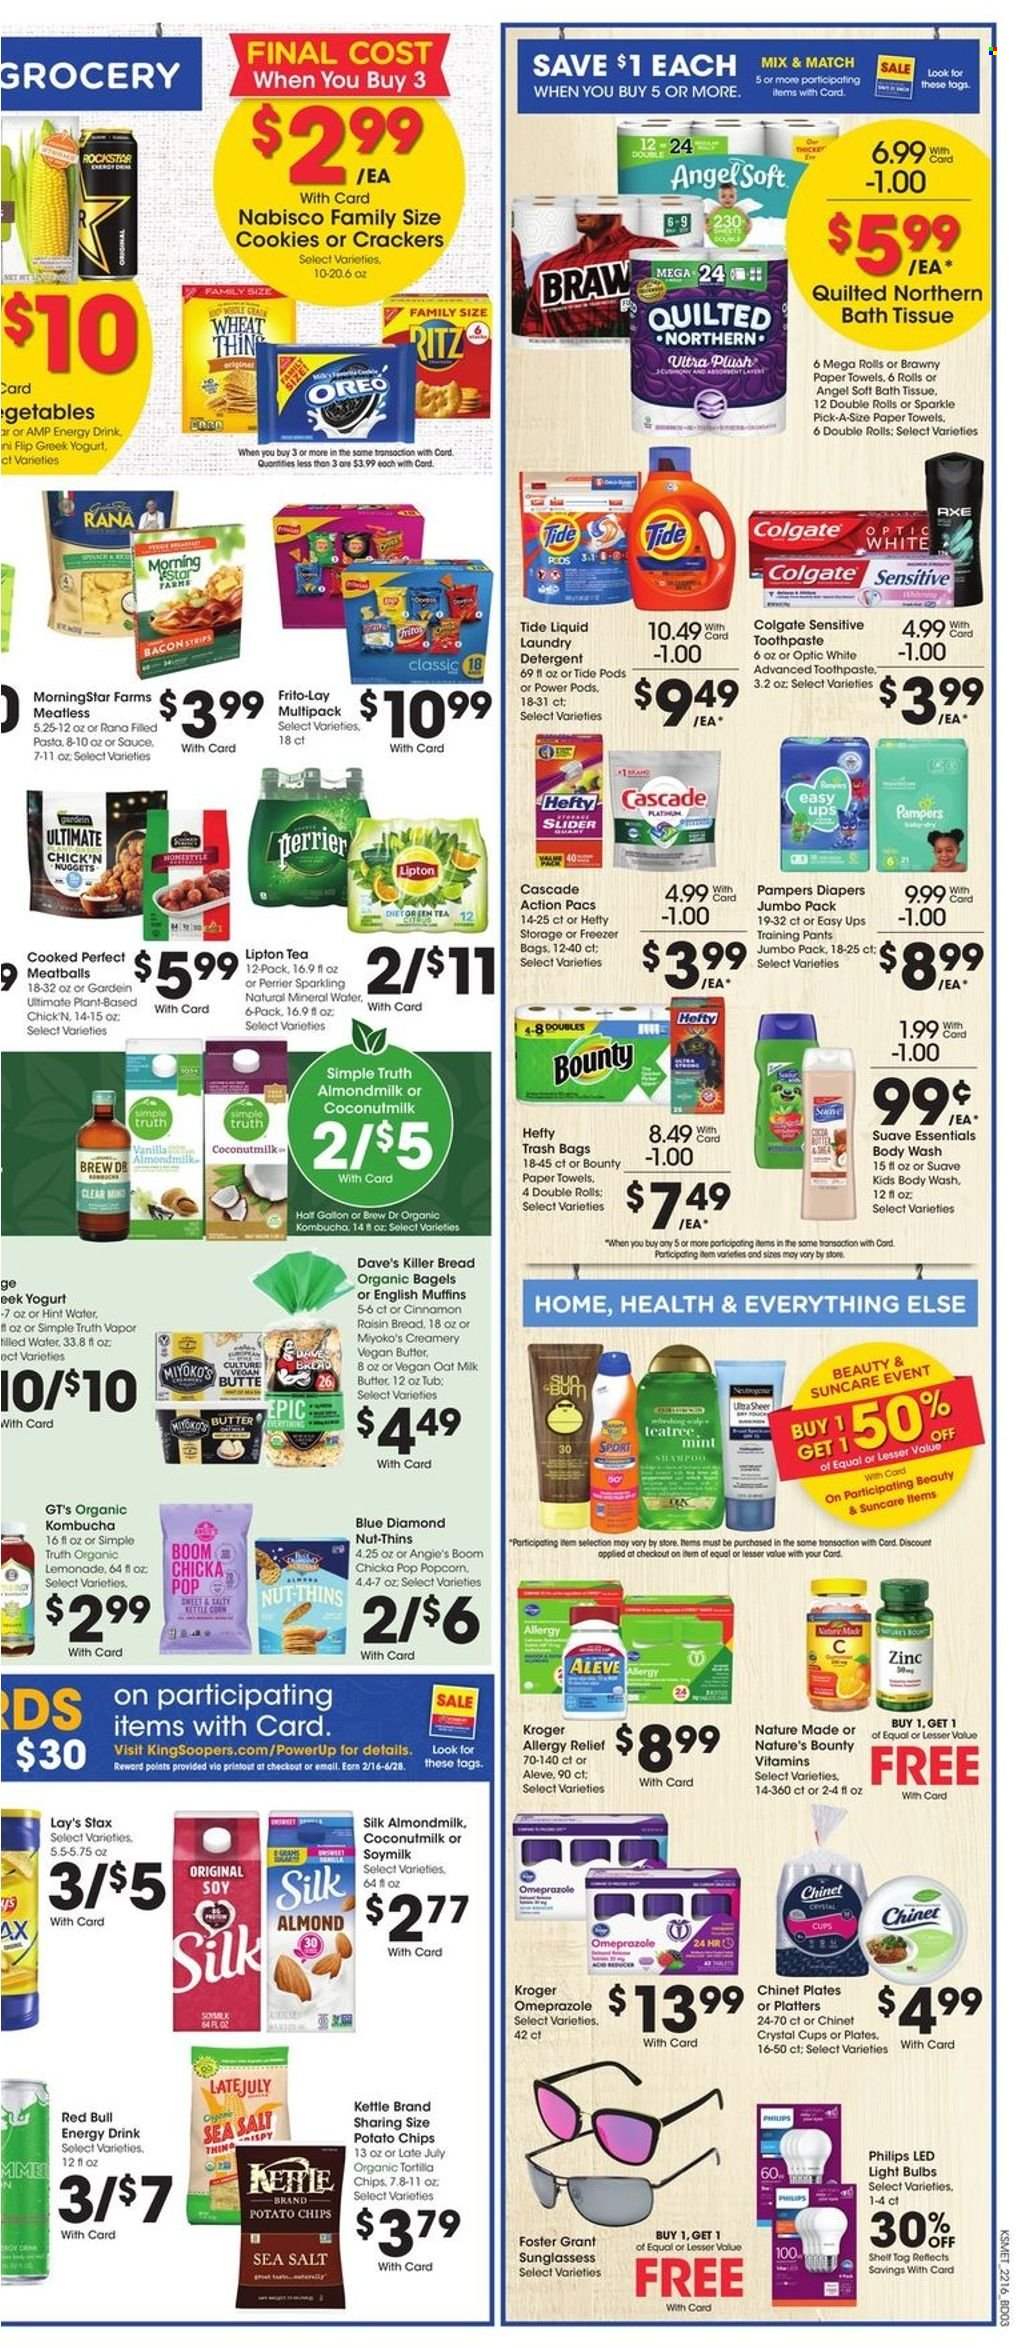 thumbnail - King Soopers Flyer - 05/18/2022 - 05/24/2022 - Sales products - Philips, bagels, english muffins, meatballs, nuggets, pasta, MorningStar Farms, Rana, bacon, greek yoghurt, Oreo, yoghurt, almond milk, milk, soy milk, Silk, oat milk, butter, strips, cookies, crackers, RITZ, potato chips, chips, Lay’s, Thins, popcorn, Frito-Lay, cocoa, coconut milk, Blue Diamond, lemonade, energy drink, Lipton, Red Bull, Perrier, Rockstar, mineral water, kombucha, tea, Pampers, pants, nappies, baby pants, bath tissue, Quilted Northern, kitchen towels, paper towels, detergent, Cascade, Tide, laundry detergent, body wash, Suave, Colgate, toothpaste, Axe, Hefty, trash bags, plate, cup, freezer bag, bulb, light bulb, freezer, LED light, Aleve, Nature Made, Nature's Bounty, zinc, allergy relief. Page 6.